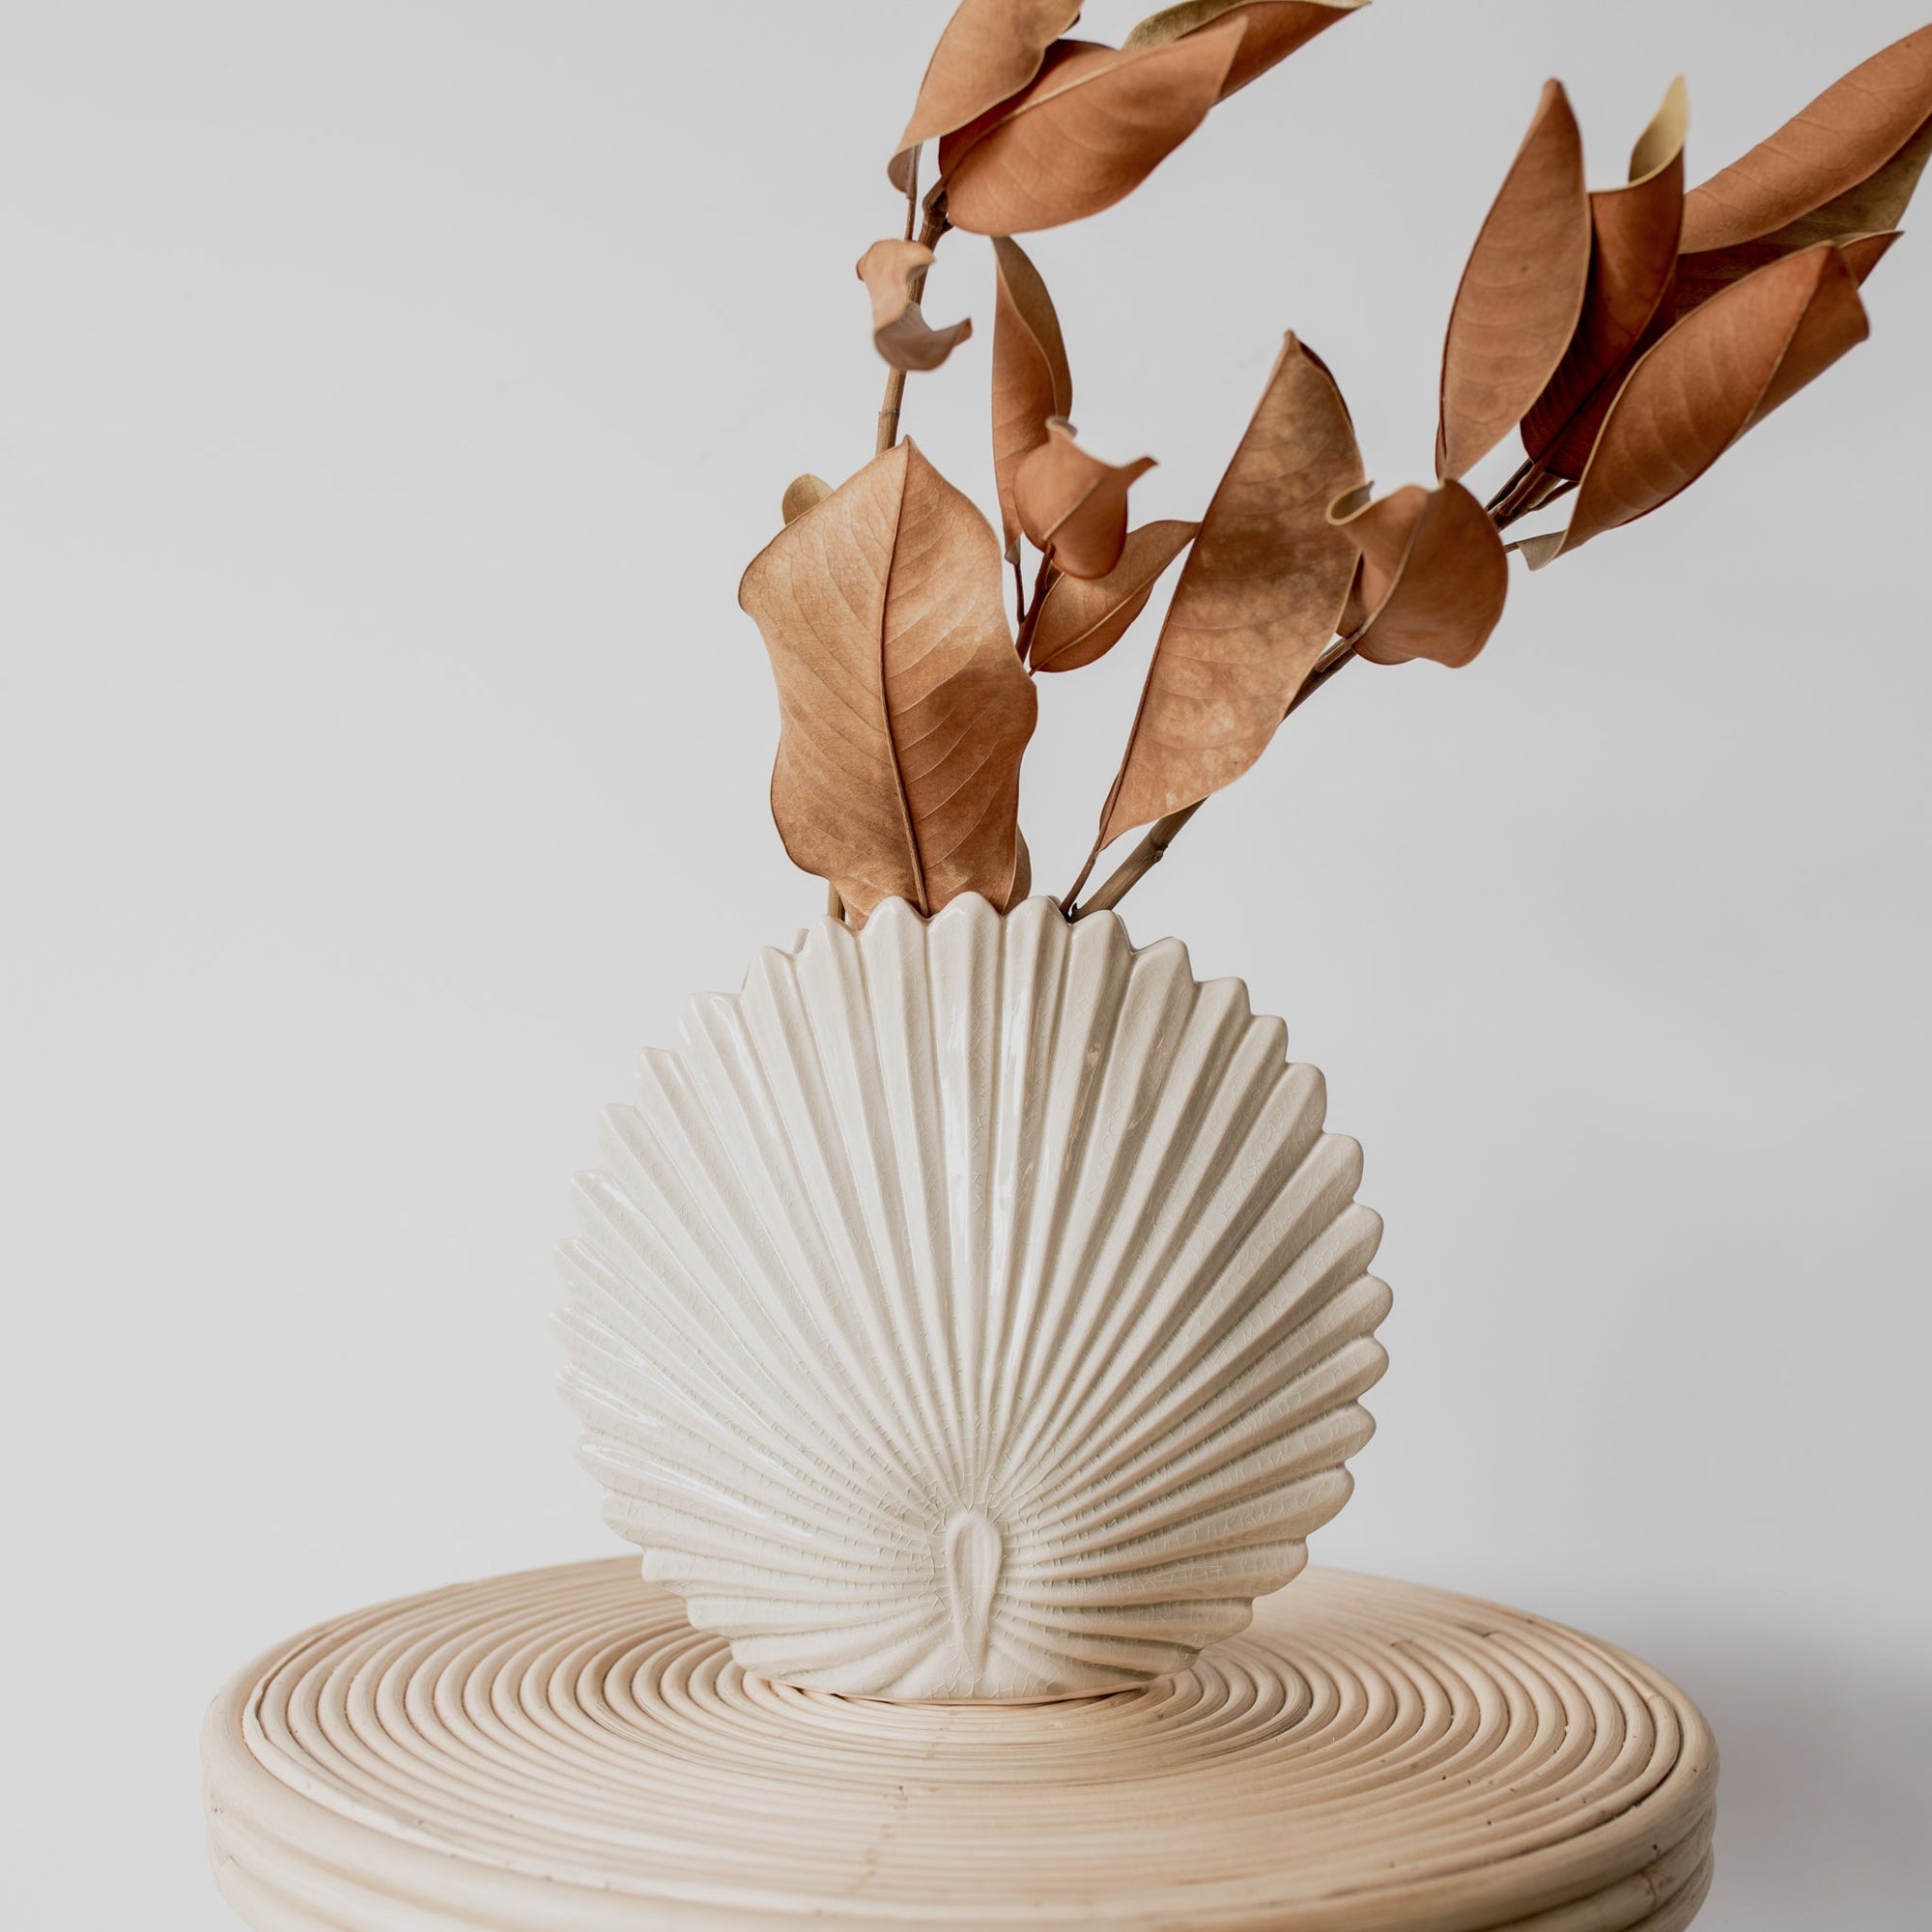 A ceramic vase that echoes art deco style in the form of a fan or peacock, in a soft creamy, off white shade from corcovado furniture and homewares